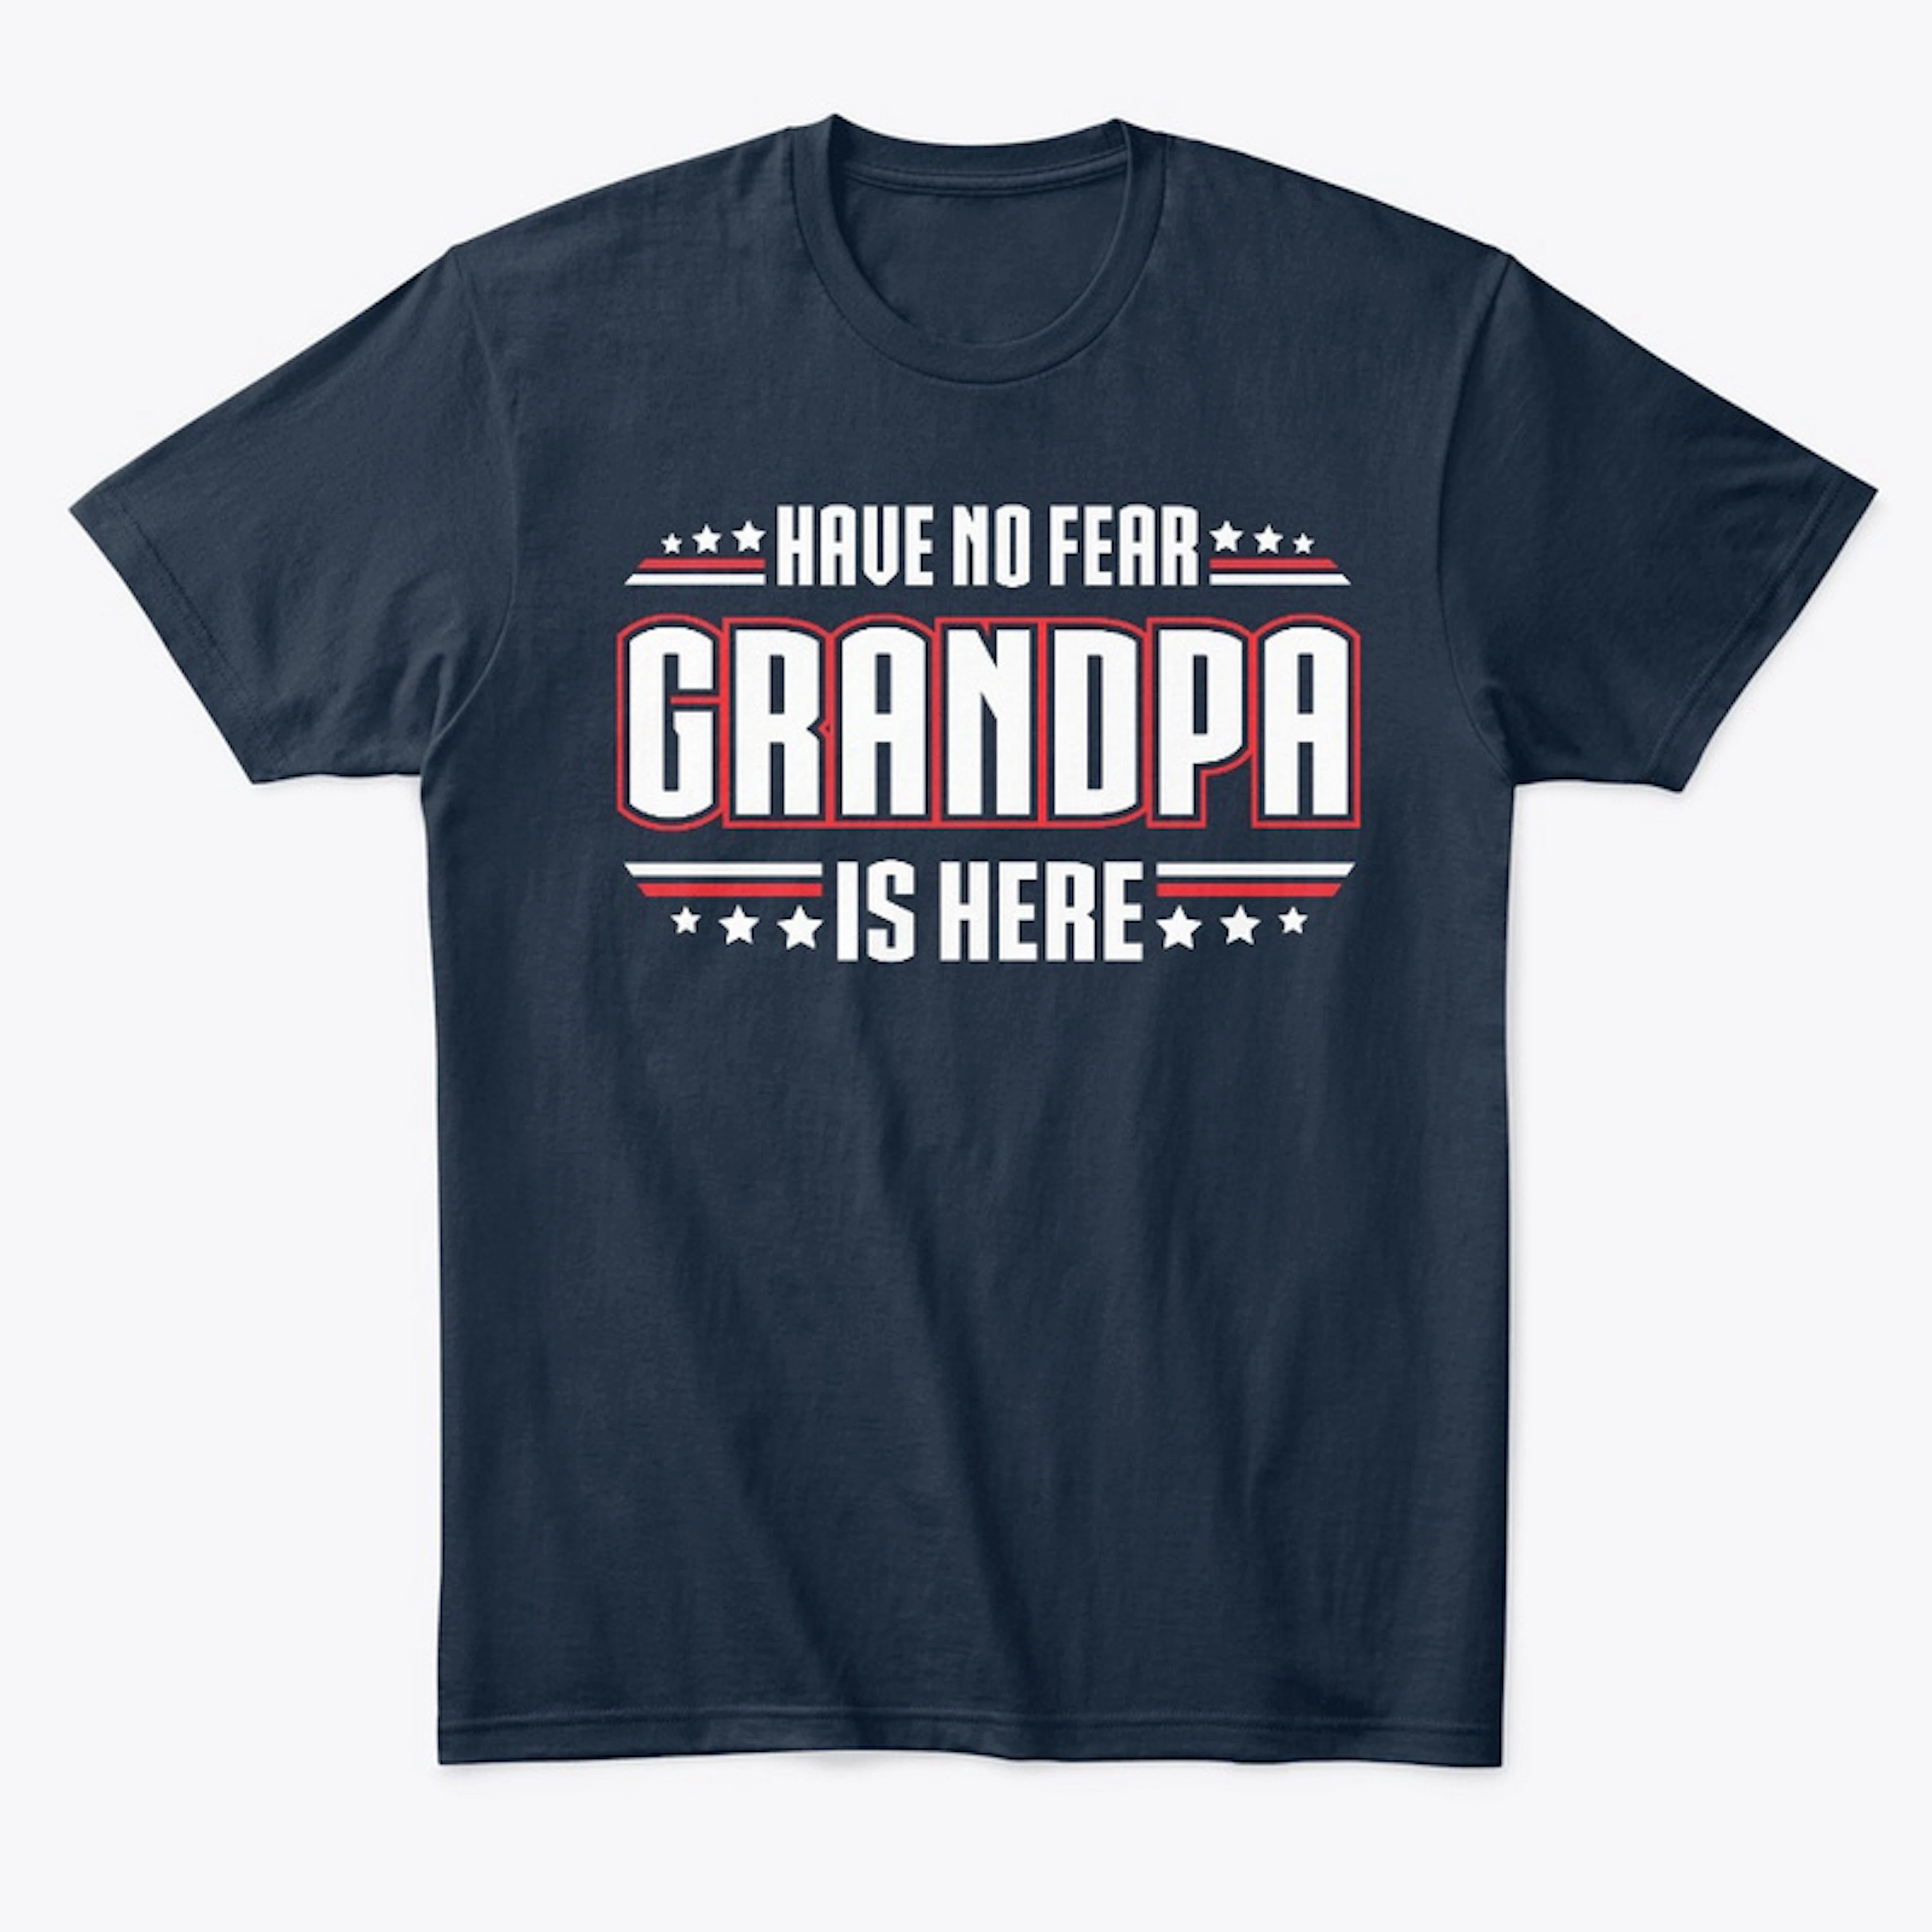 Have No Fear Grandpa is Here